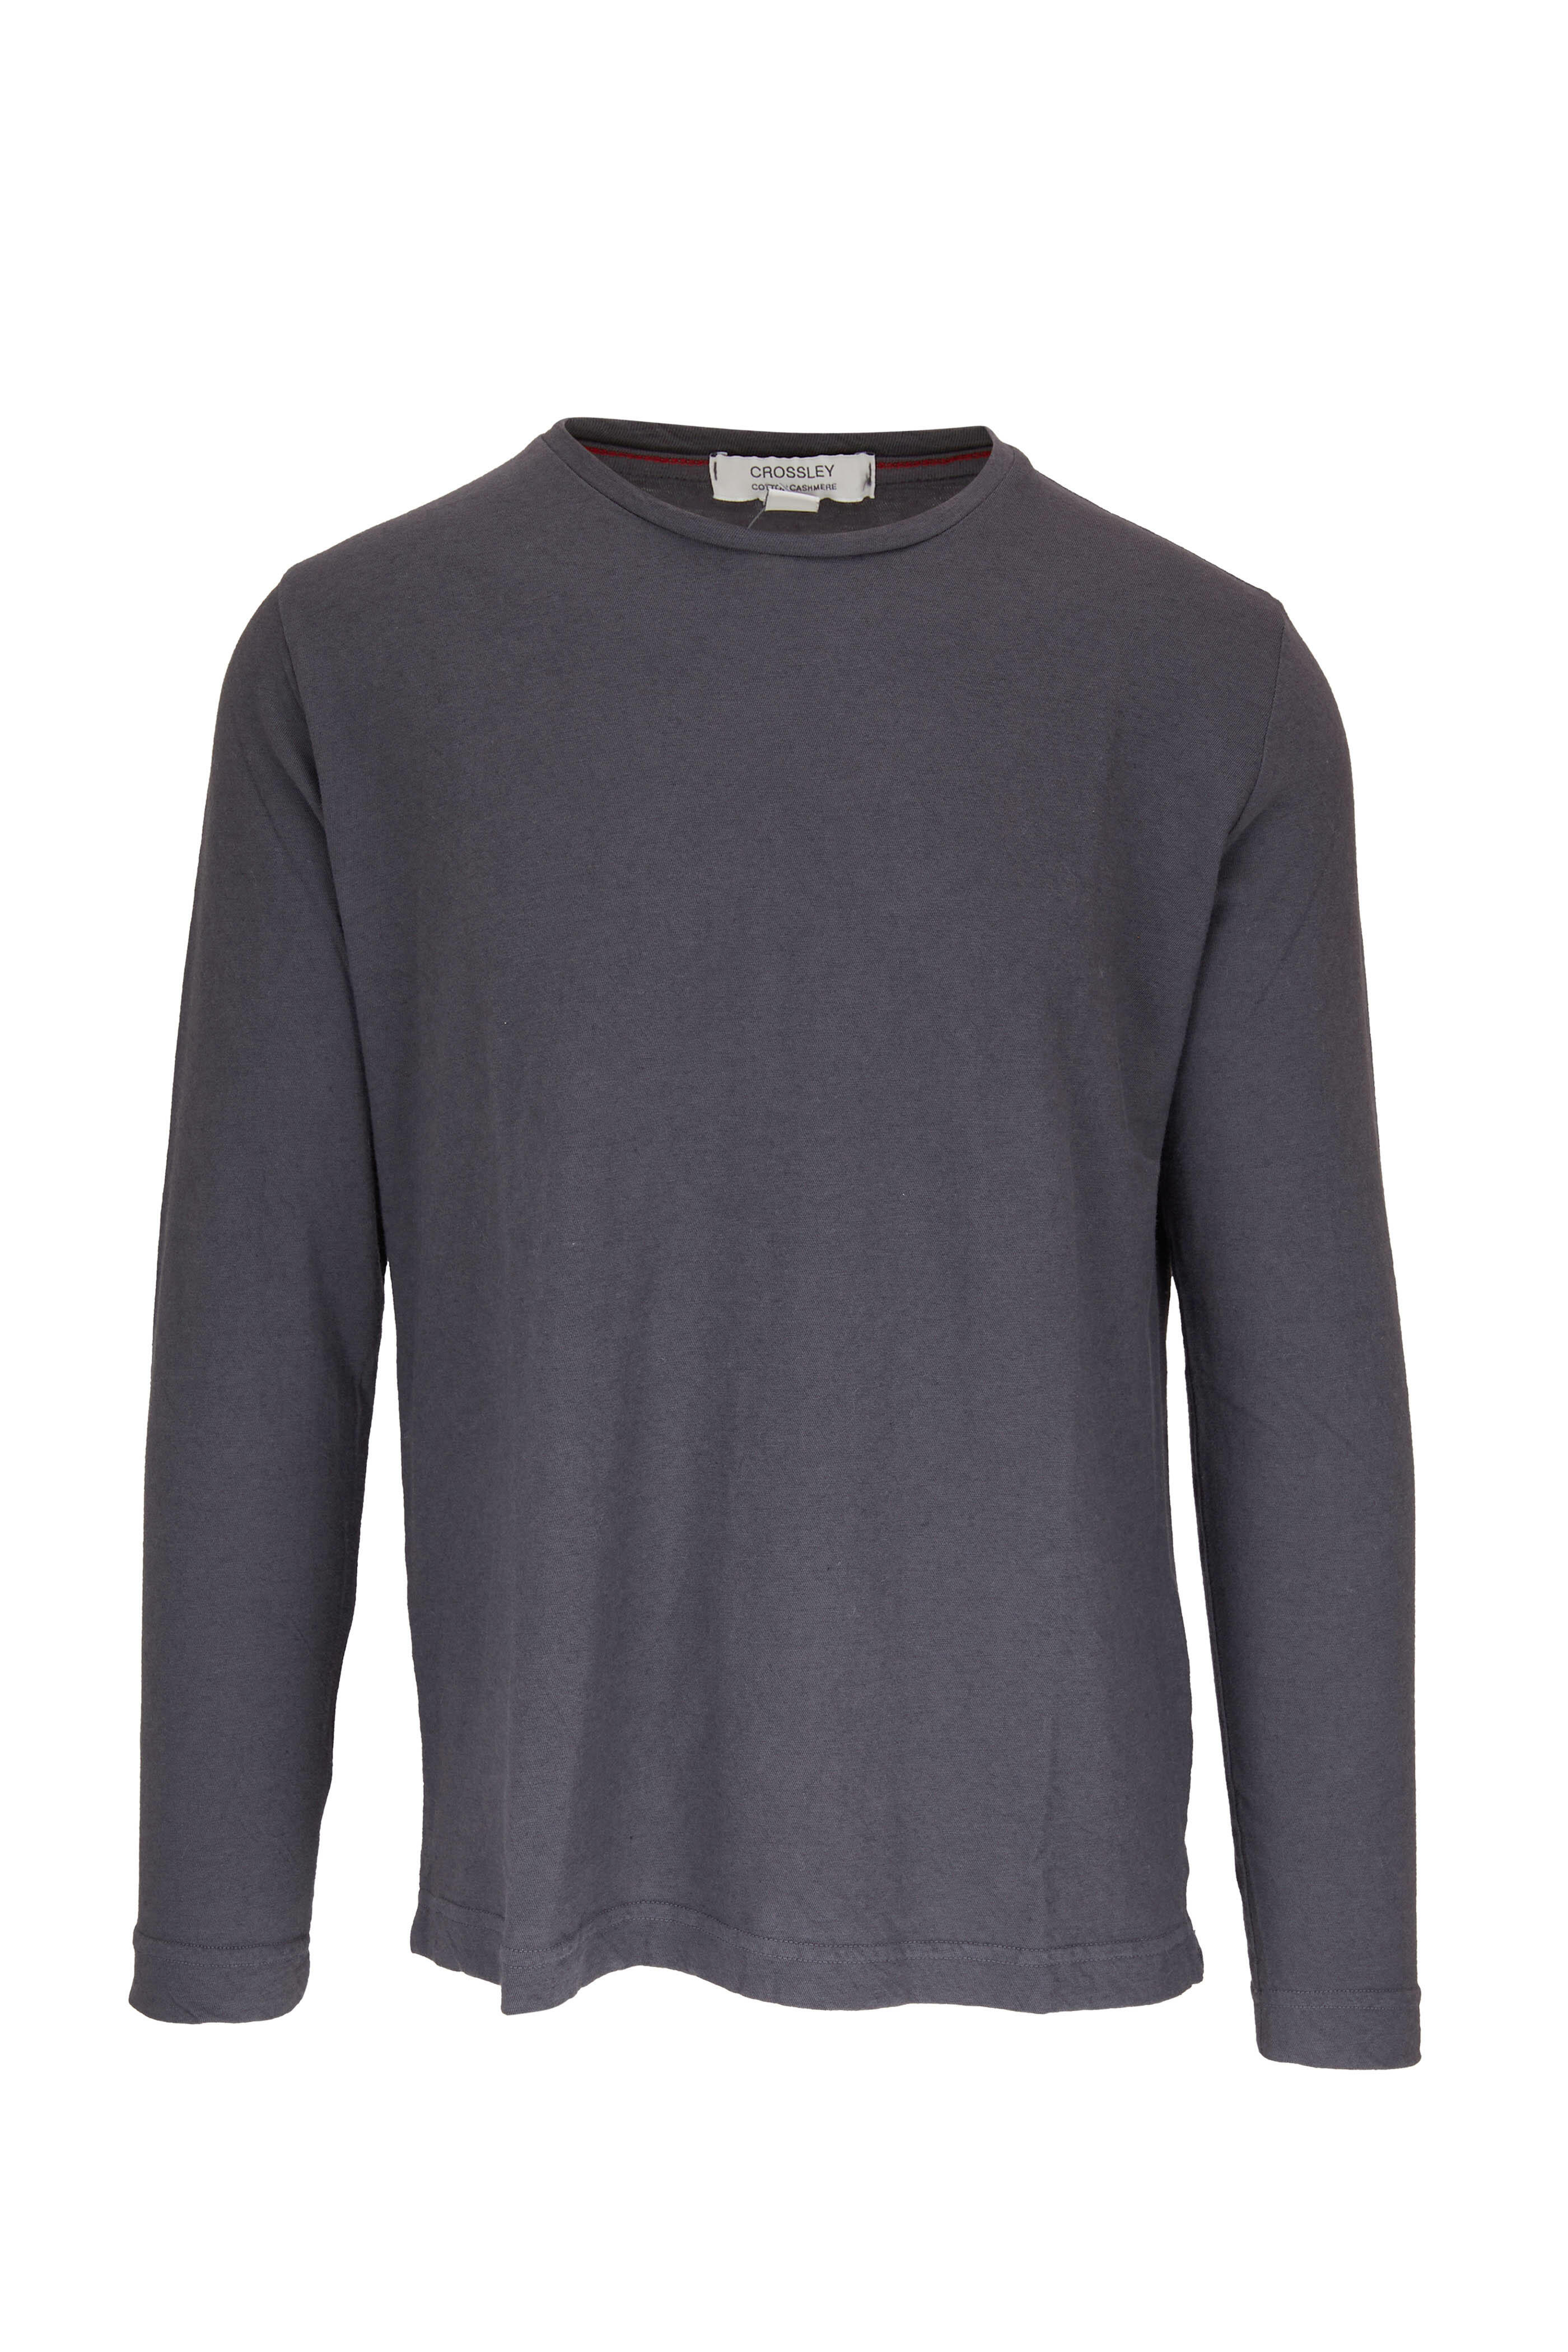 Crossley - Gray Cotton & Cashmere Long Sleeve T-Shirt